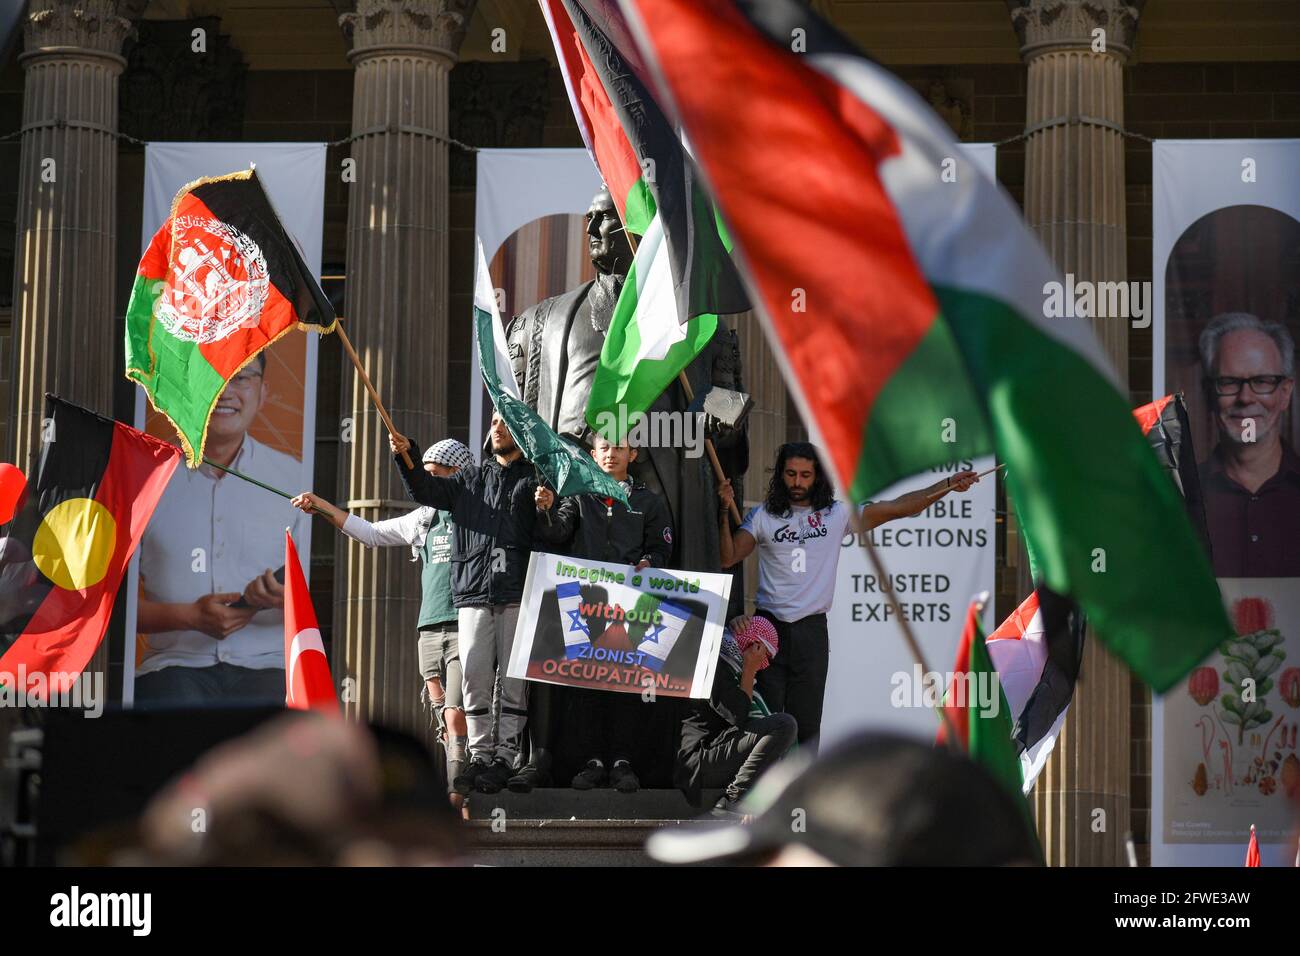 Melbourne, Australia. 22nd May 2021. For the second consecutive weekend, supporters of freedom for Palestine gather in Melbourne to protest the atrocities being committed against the indigenous Palestinian people in their homeland. This follows a ceasefire between Israeli and Palestinian forces announced the day before. Credit: Jay Kogler/Alamy Live News Stock Photo